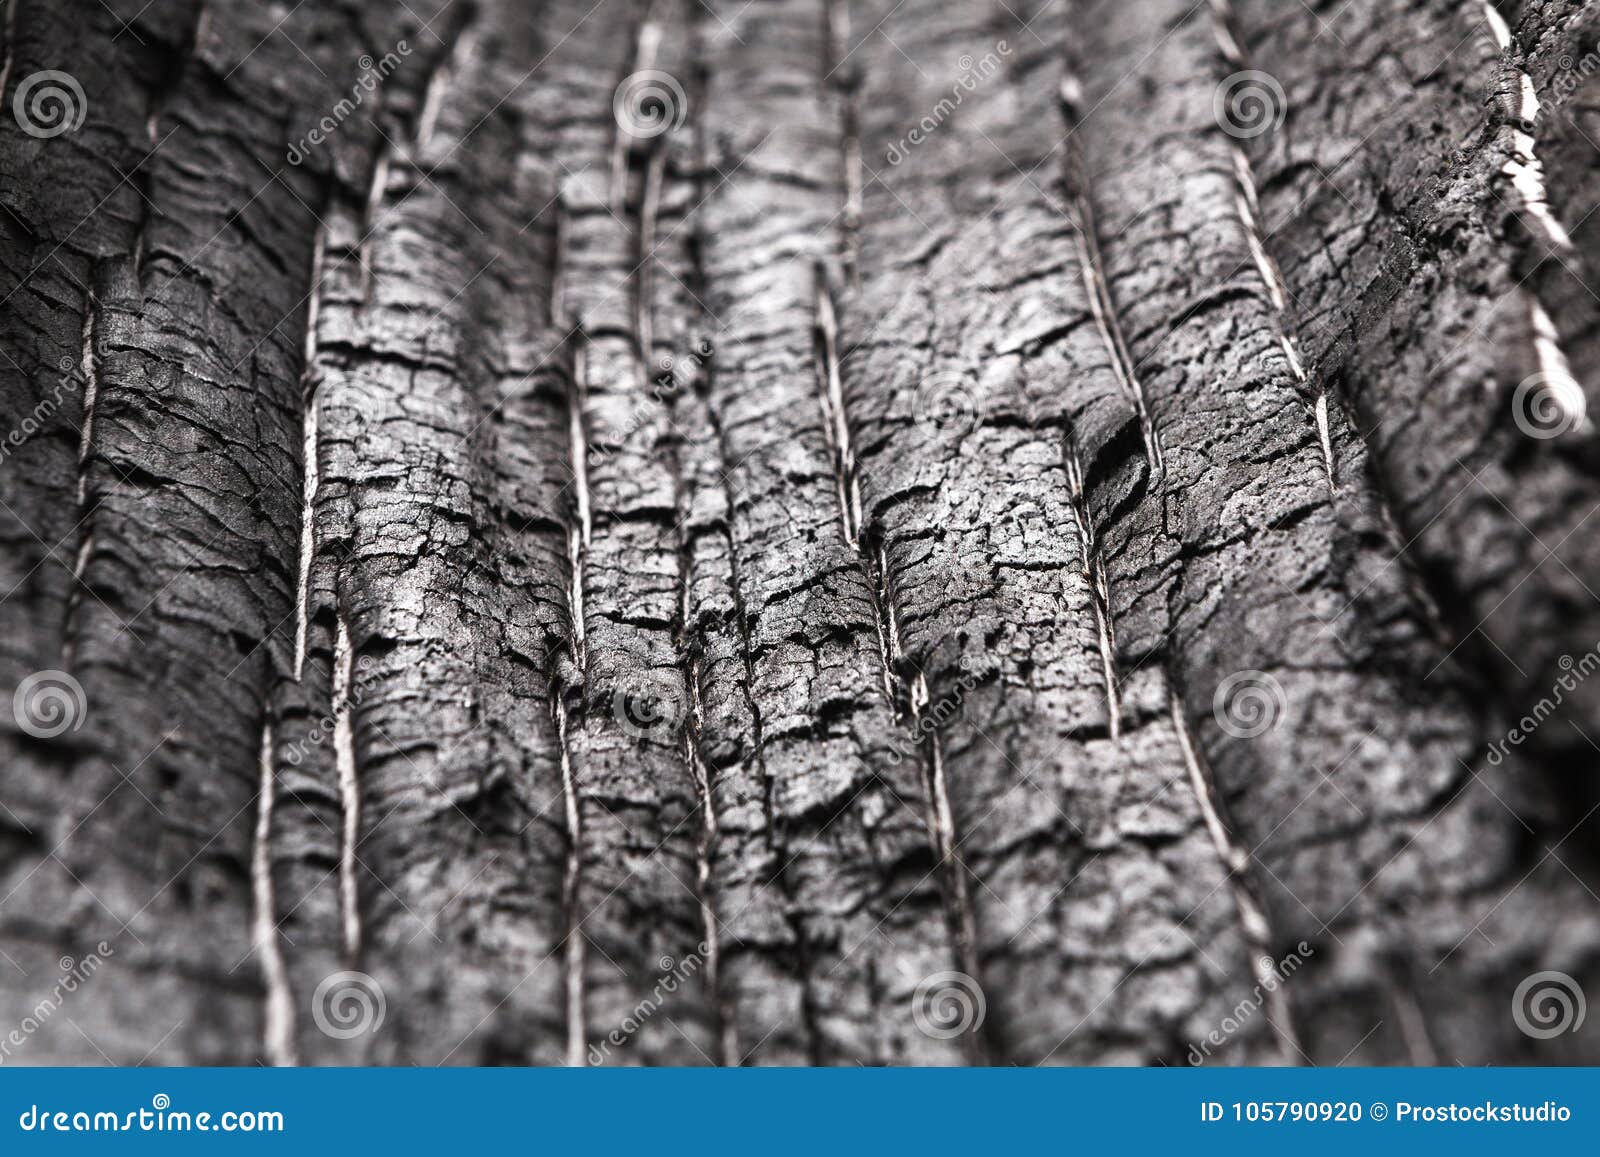 Black And White Natural Wood Texture Closeup Background